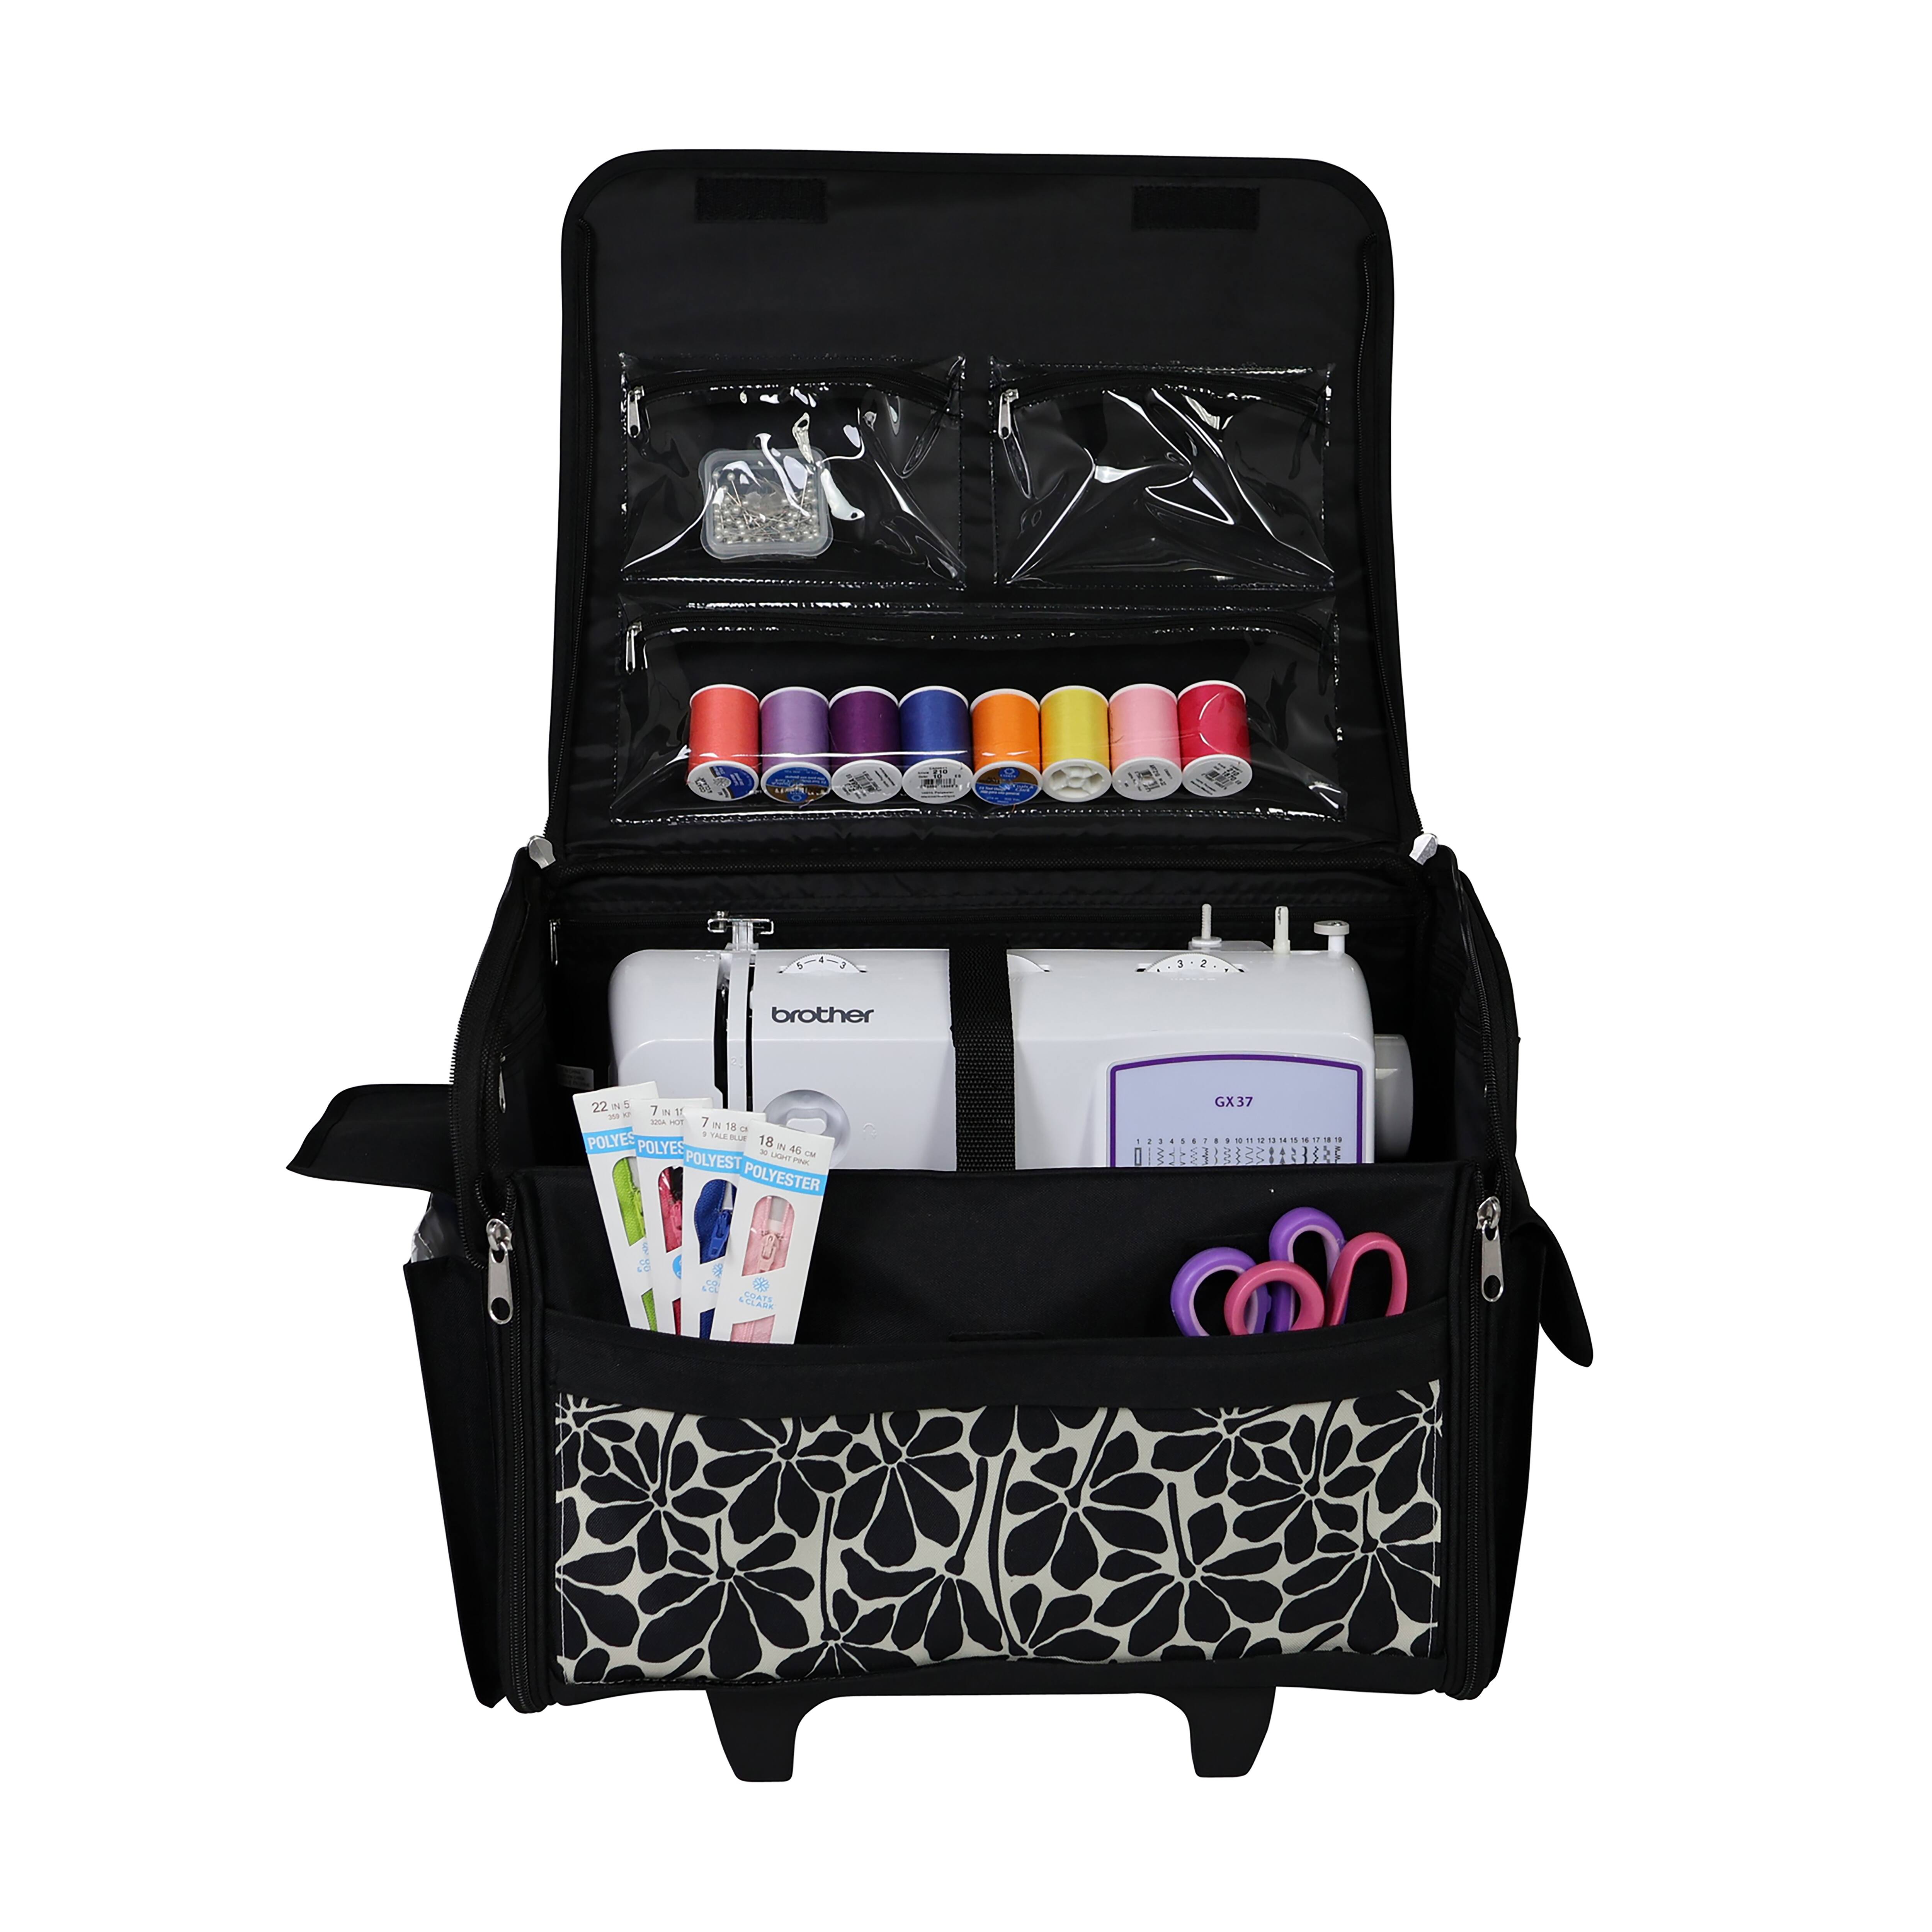 Everything Mary Collapsible Rolling Sewing Machine Tote